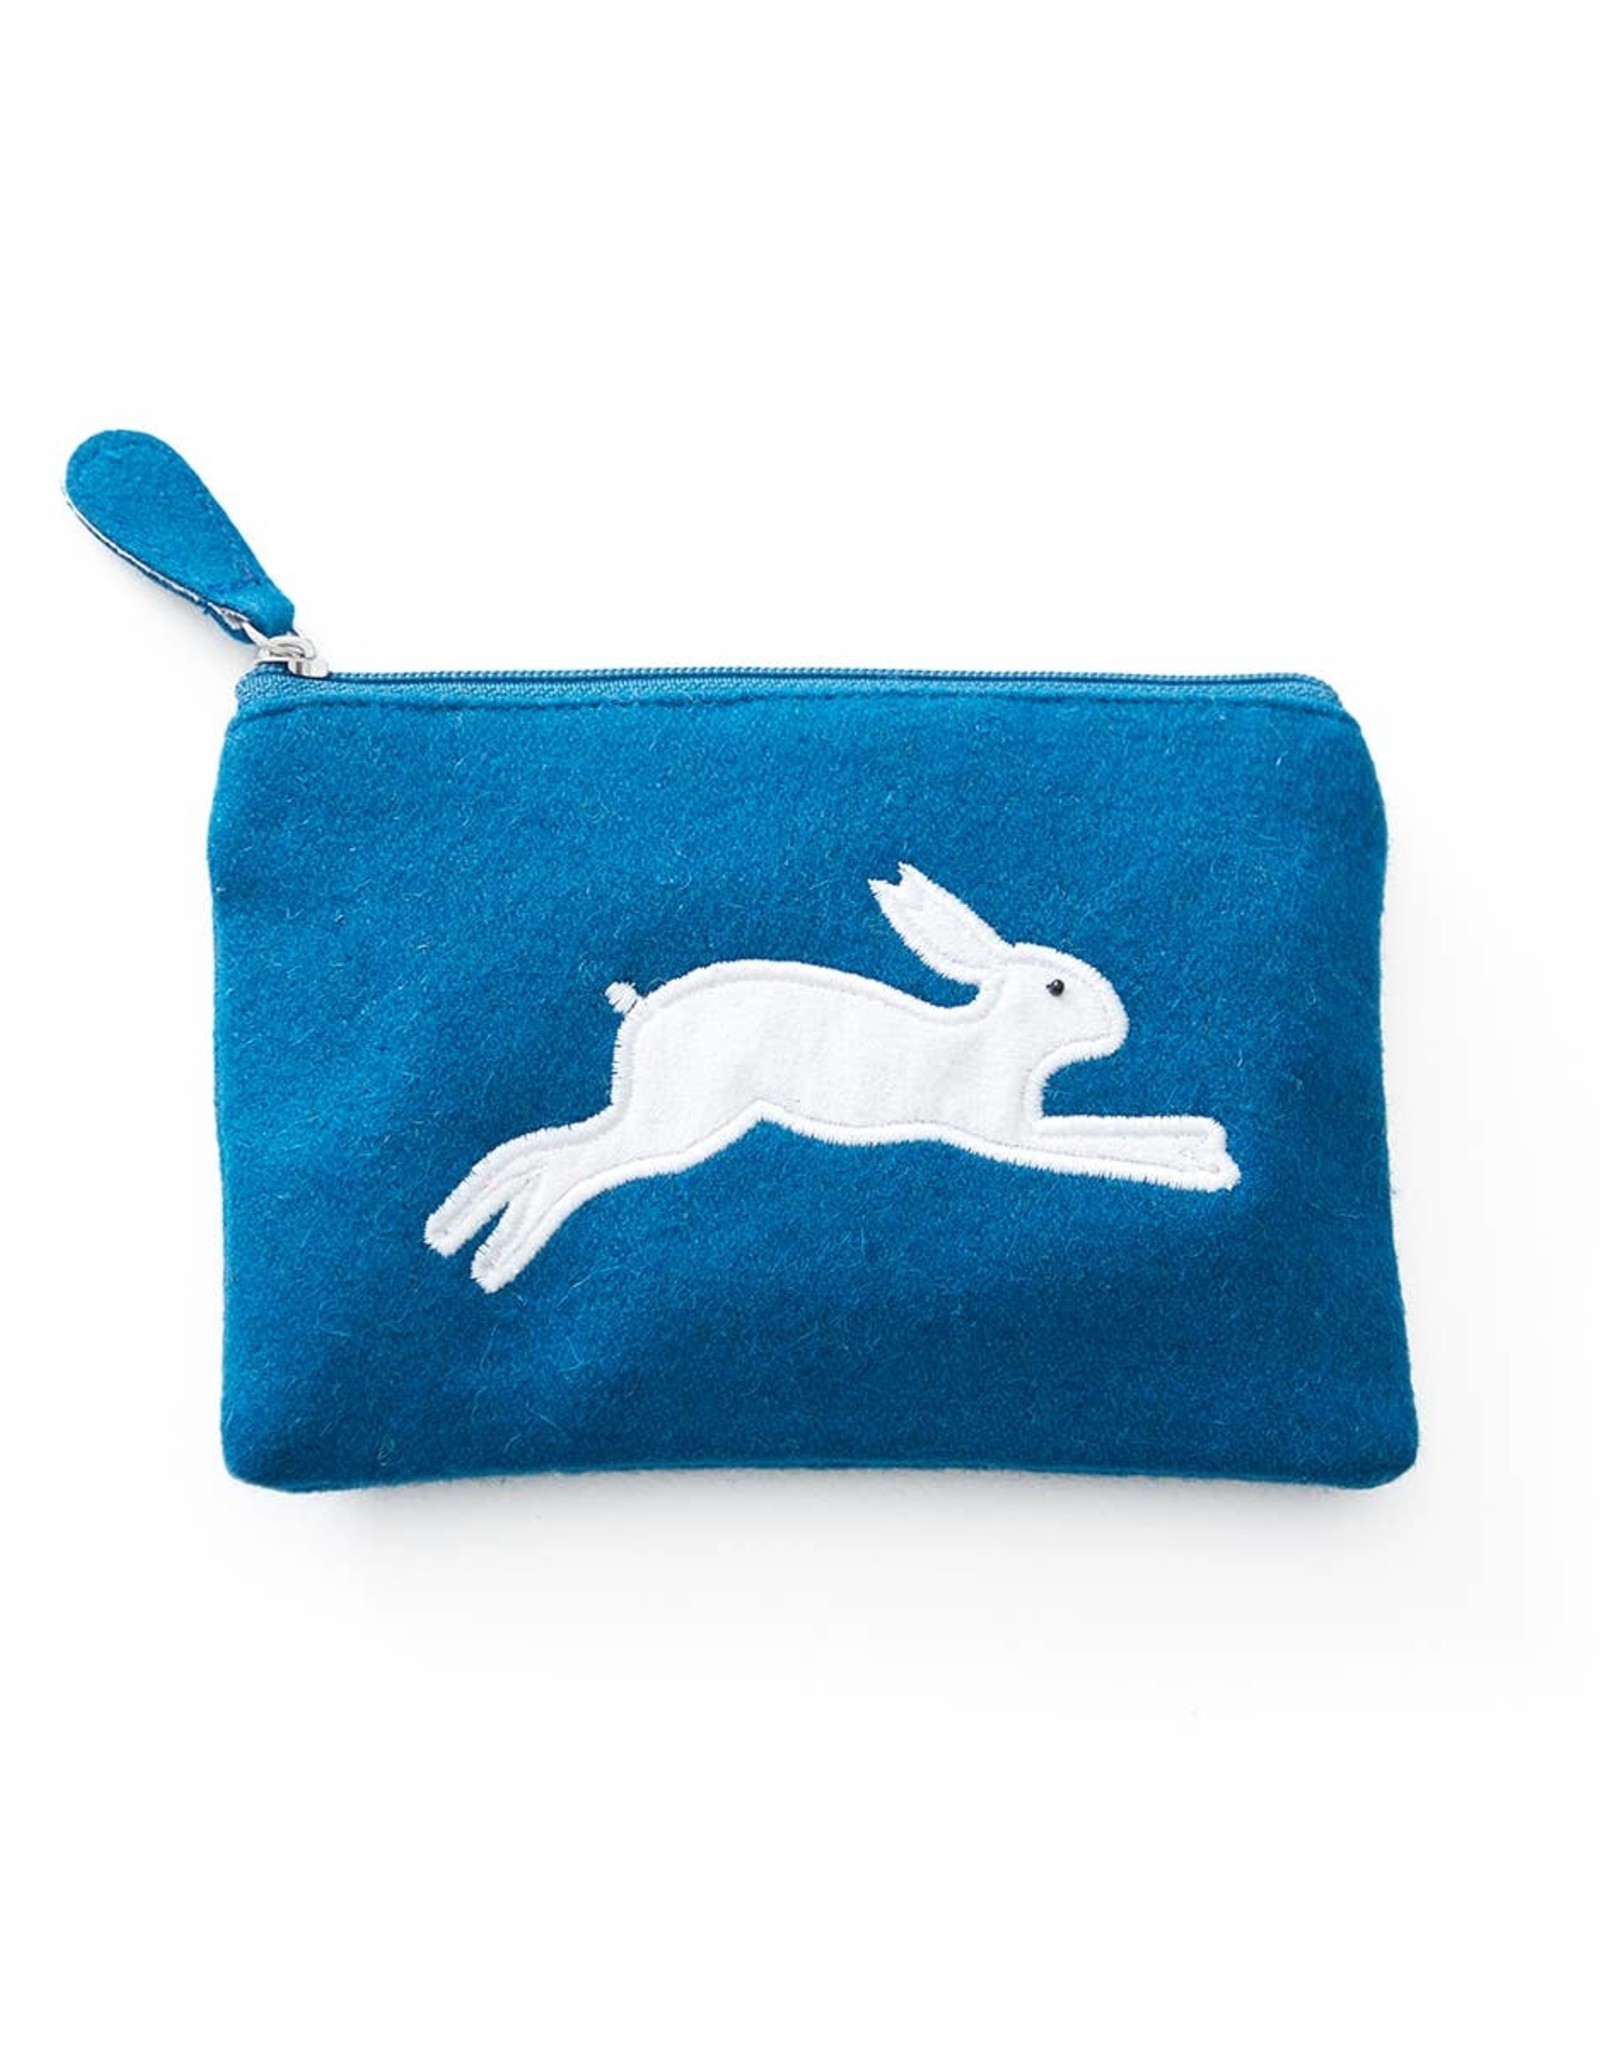 WorldFinds Leaping Hare Coin Purse Blue